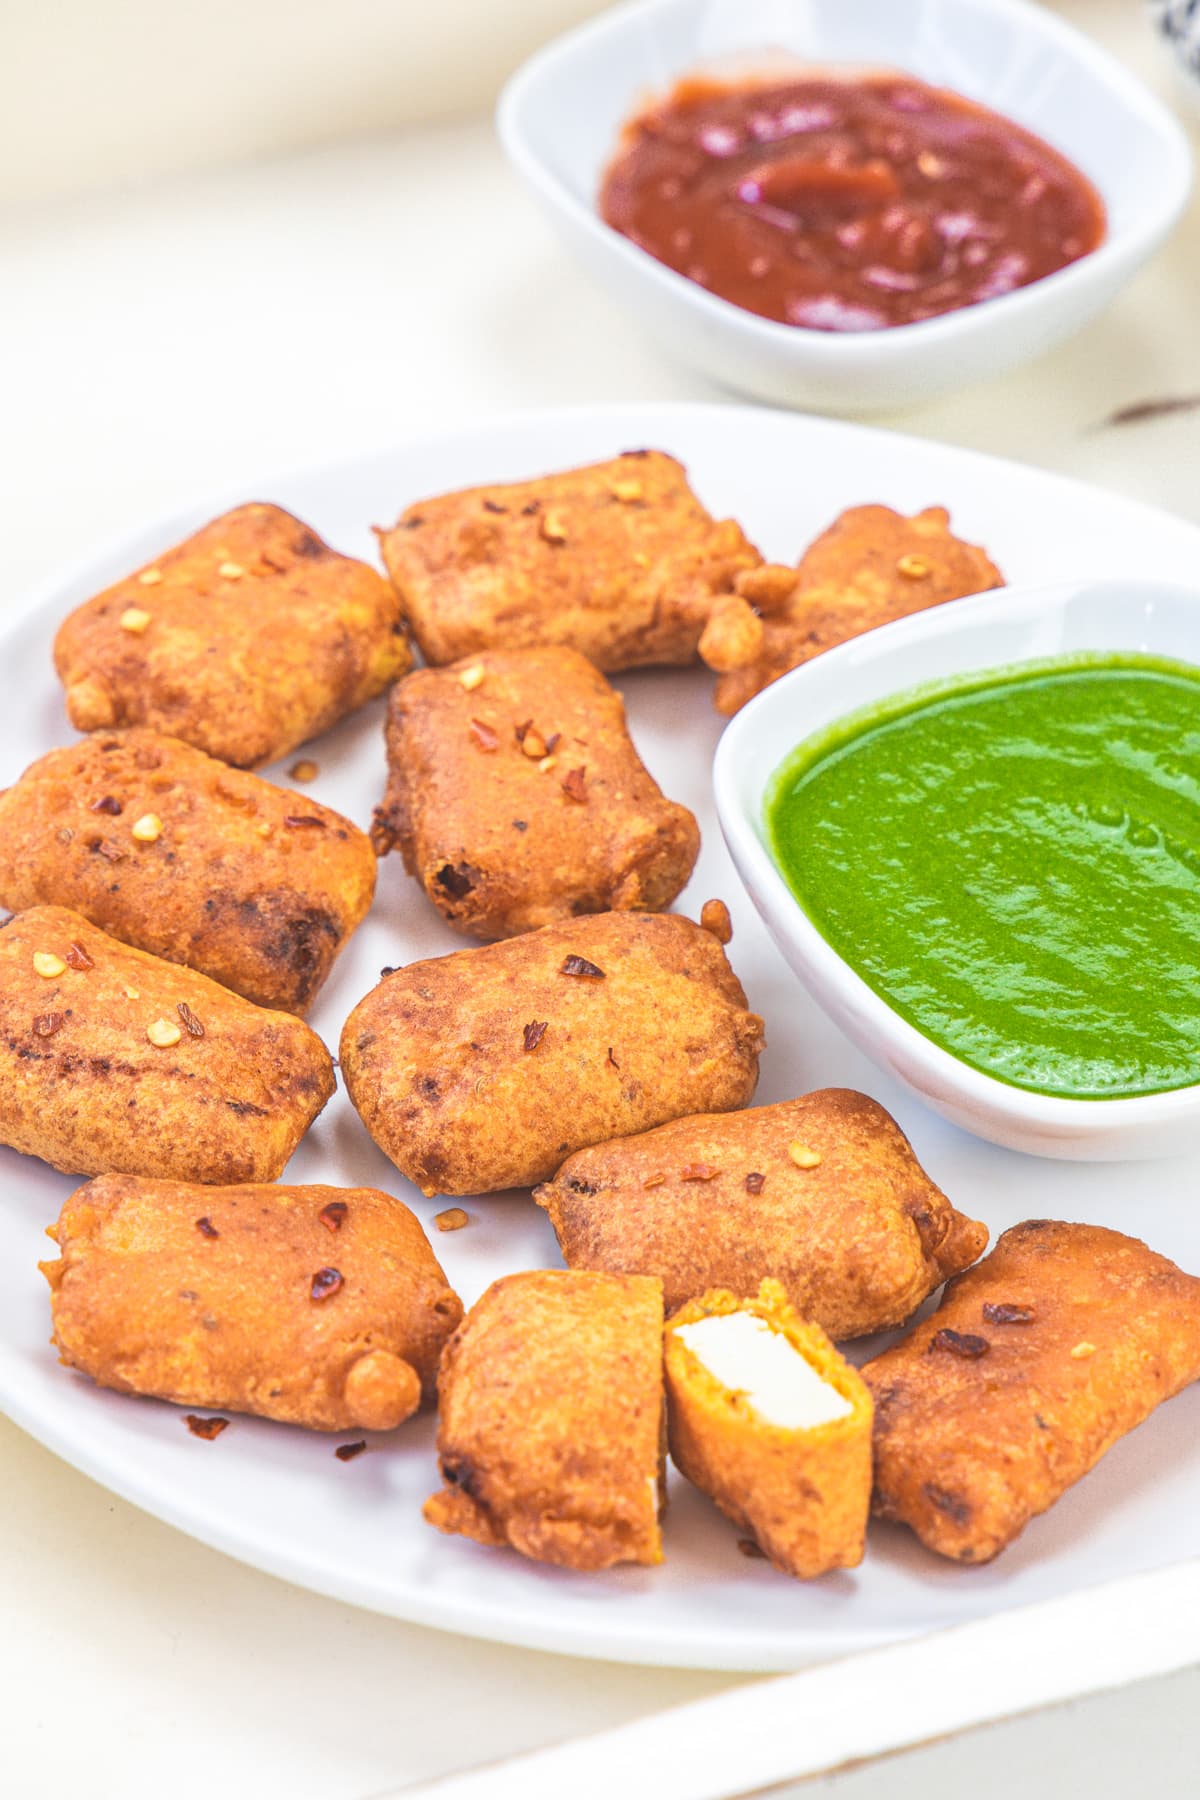 Paneer pakora with cilantro chutney and ketchup bowl in the back.